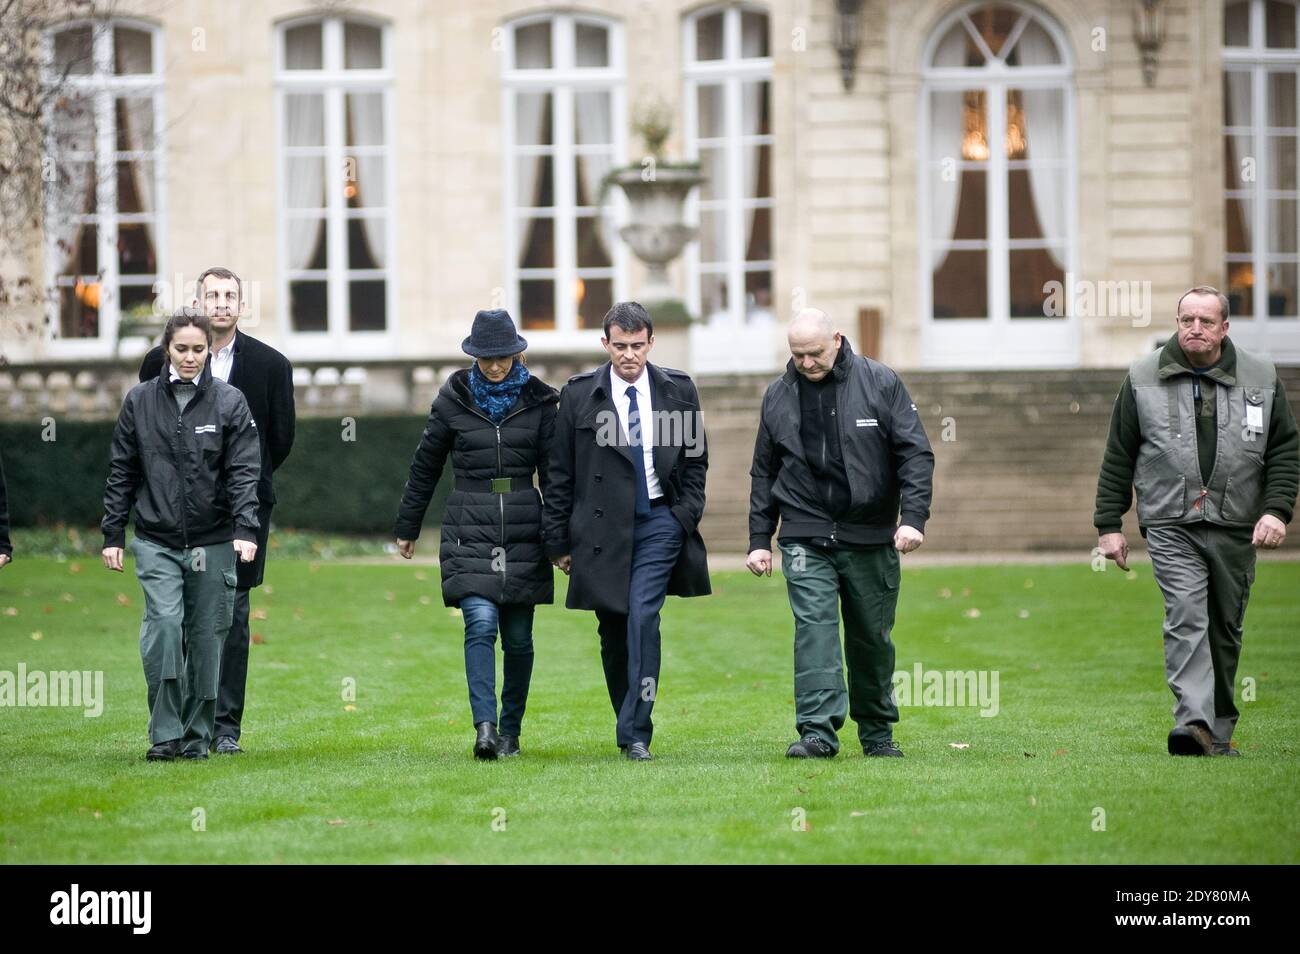 French Prime Minister Manuel Valls arriving along with his wife Anne Gravoin and gardeners to plant the tree called 'of the Prime Minister' - as is the republican tradition - in the gardens of his headquarters Hotel de Matignon in Paris, France on December 16, 2014. The tree, chosen by the Prime Minister, is an oak of the species 'Quercus robur fastigiata' and is located on the front lawn. The tradition of planting a tree at the PM's headquarters was introduced by the late Prime Minister Raymond Barre in 1978. Photo Pool by Nicolas Messyasz/ABACAPRESS.COM Stock Photo